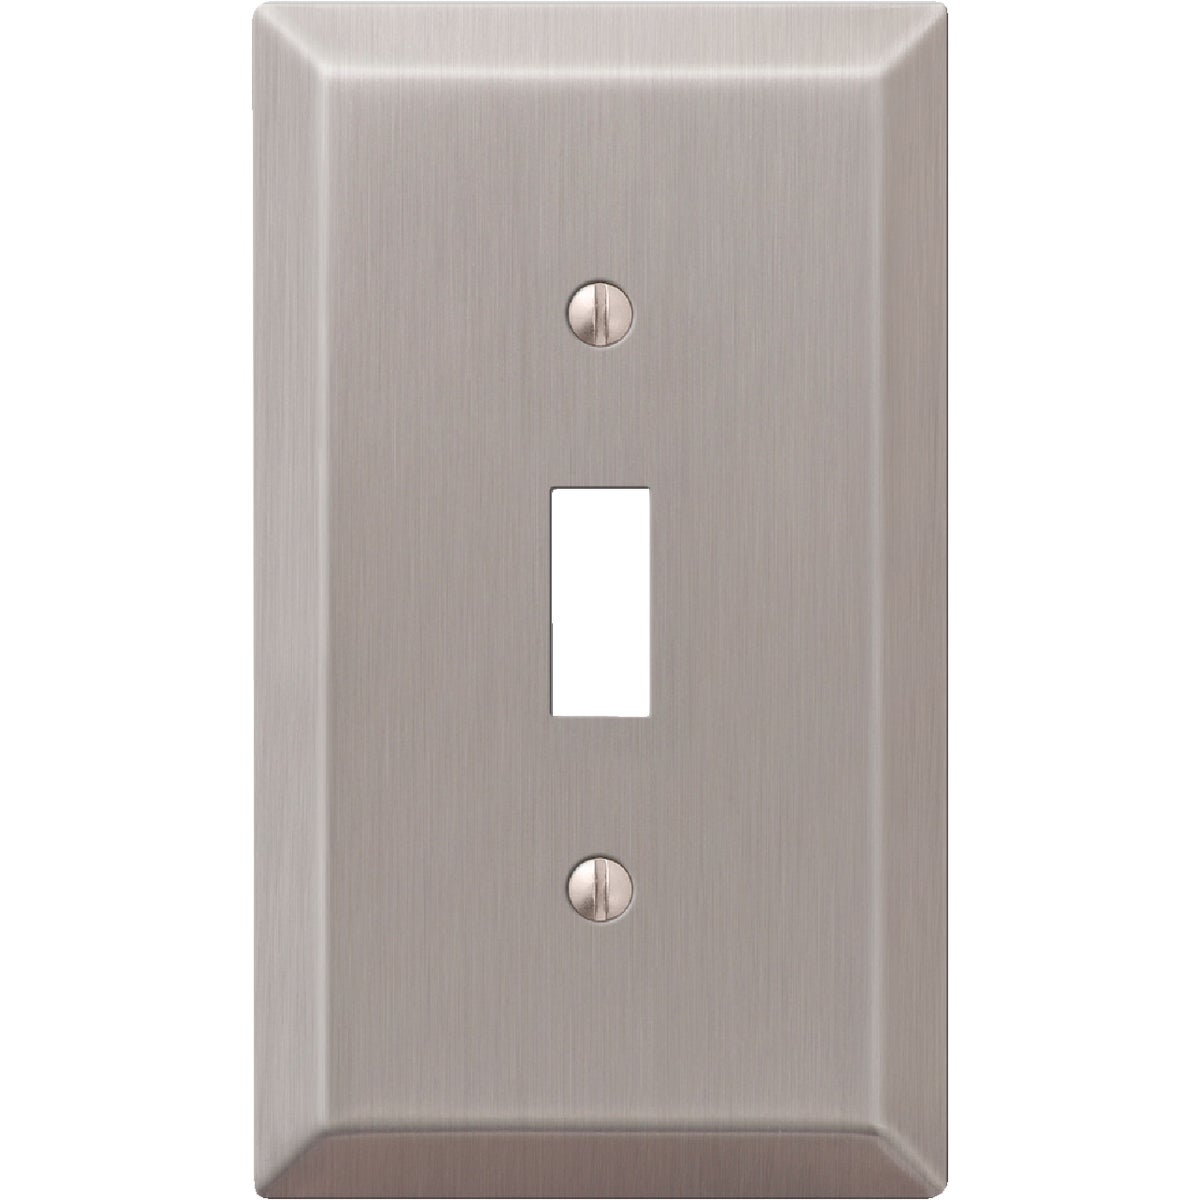 Item 556785, Stamped steel toggle switch wall plate. Contemporary styling. Durable.